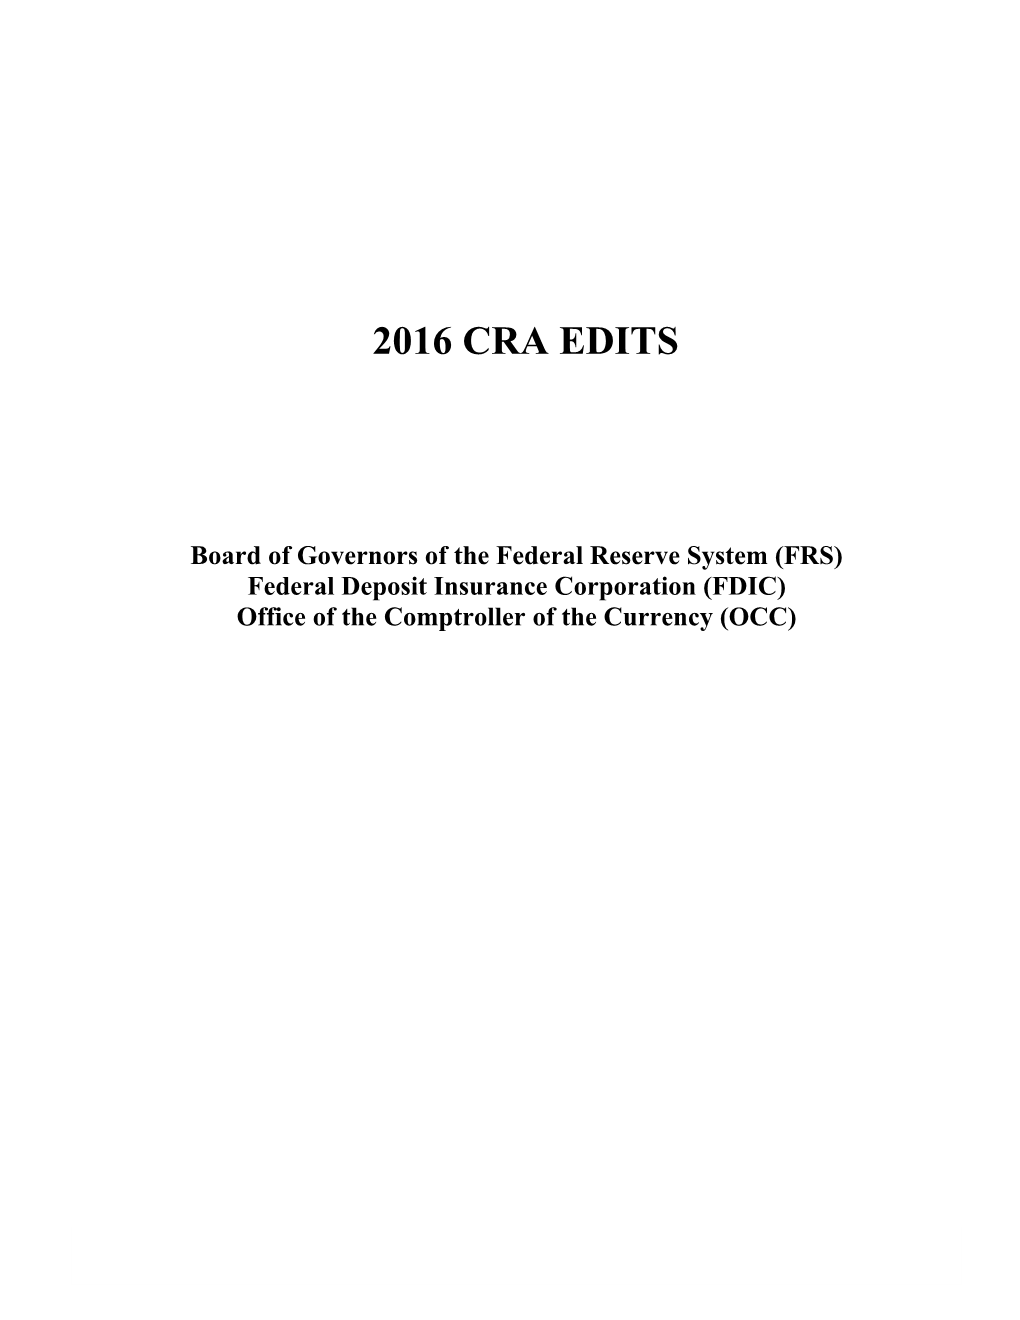 Board of Governors of the Federal Reserve System (FRS)